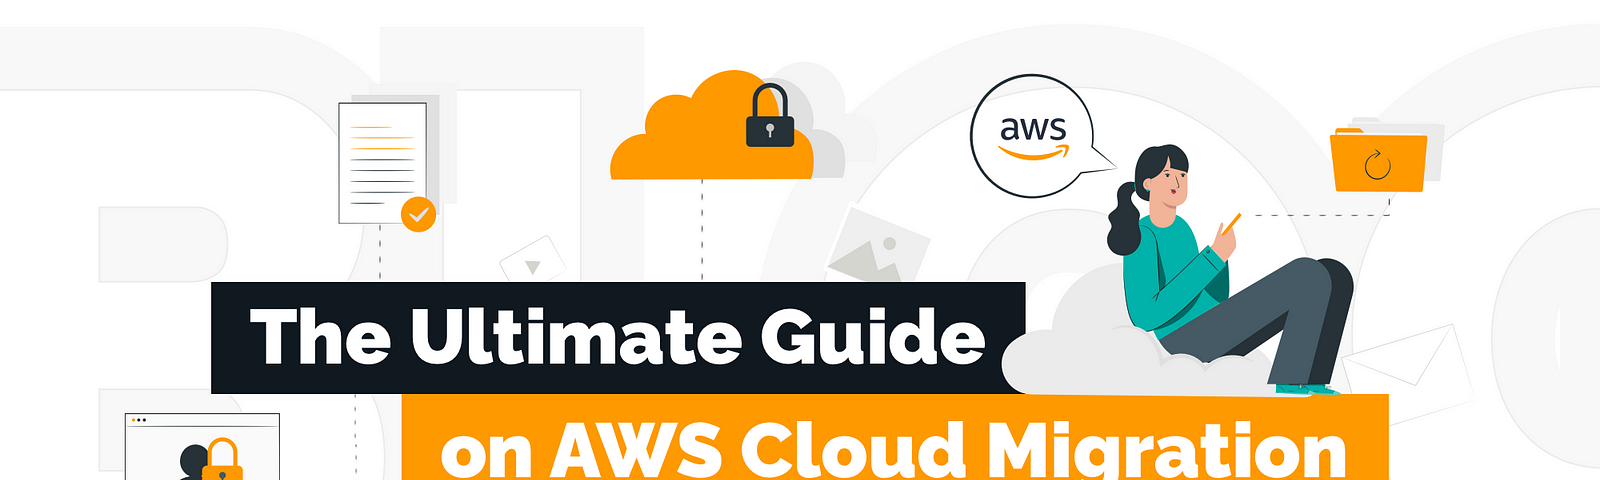 How to Migrate to AWS Cloud: Tools & Strategy for Migration | TechMagic.co